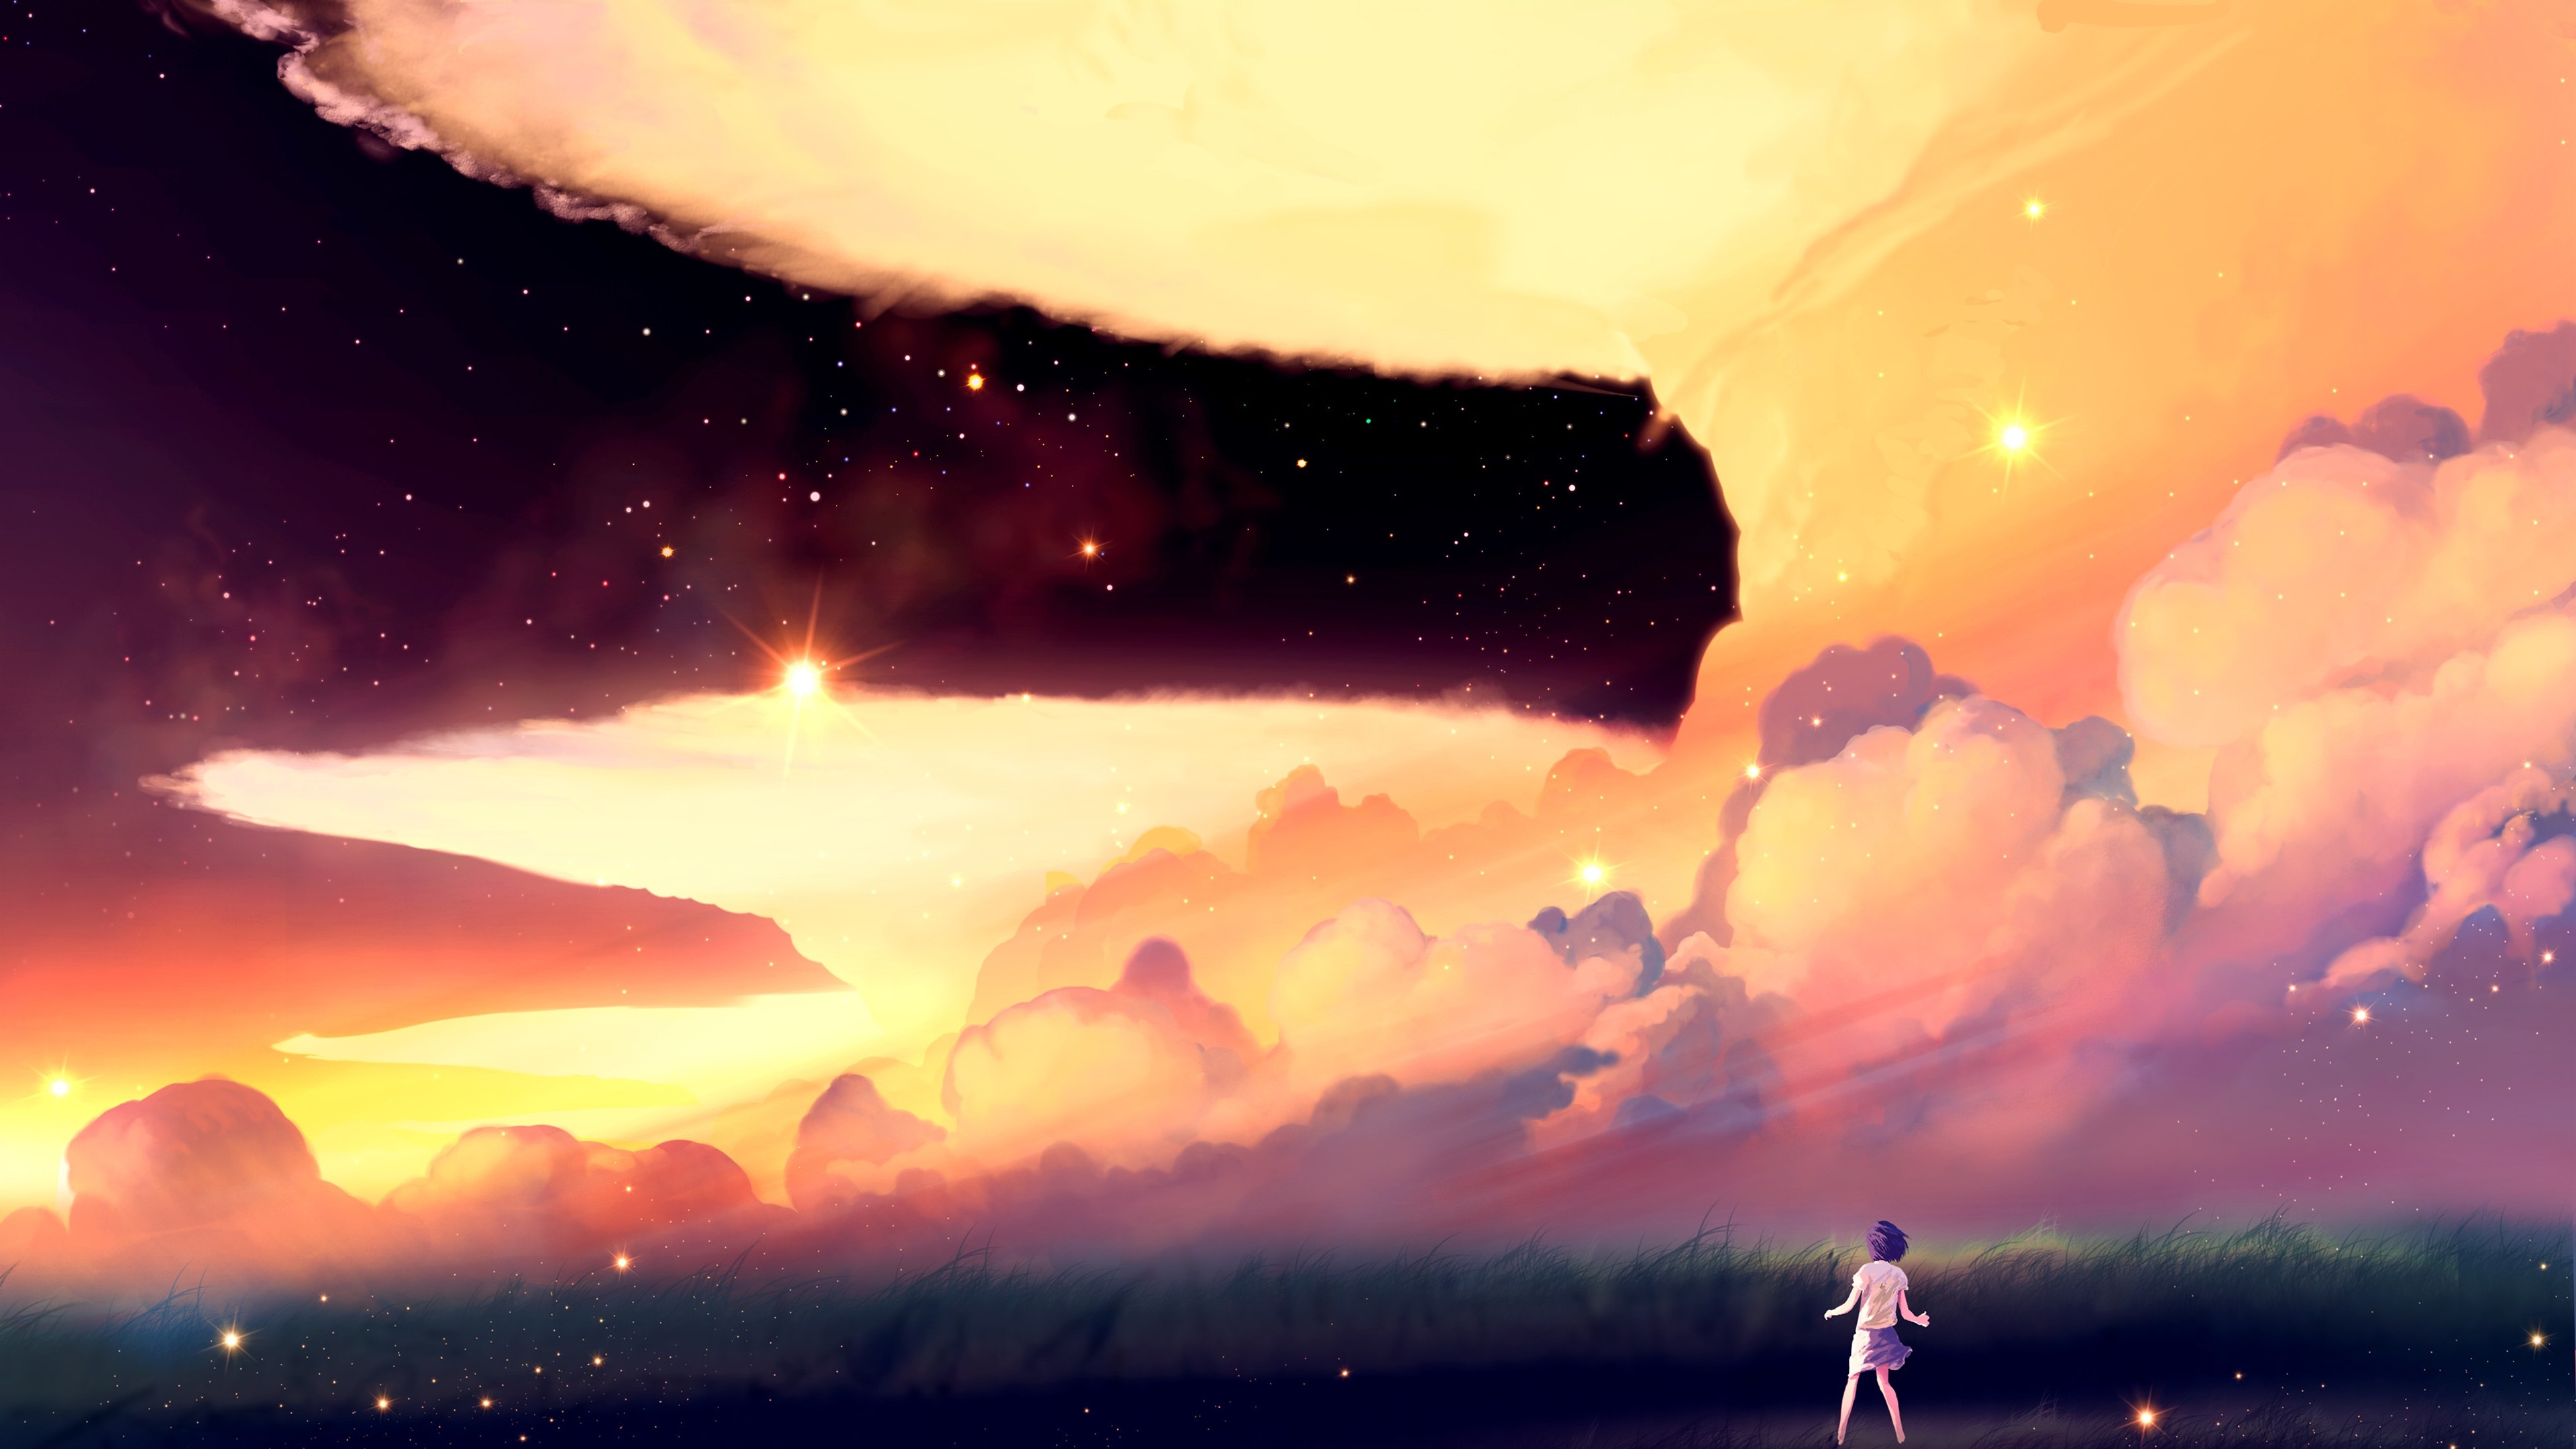 Wallpaper Stars, clouds, grass, anime girl 3840x2160 UHD 4K Picture, Image